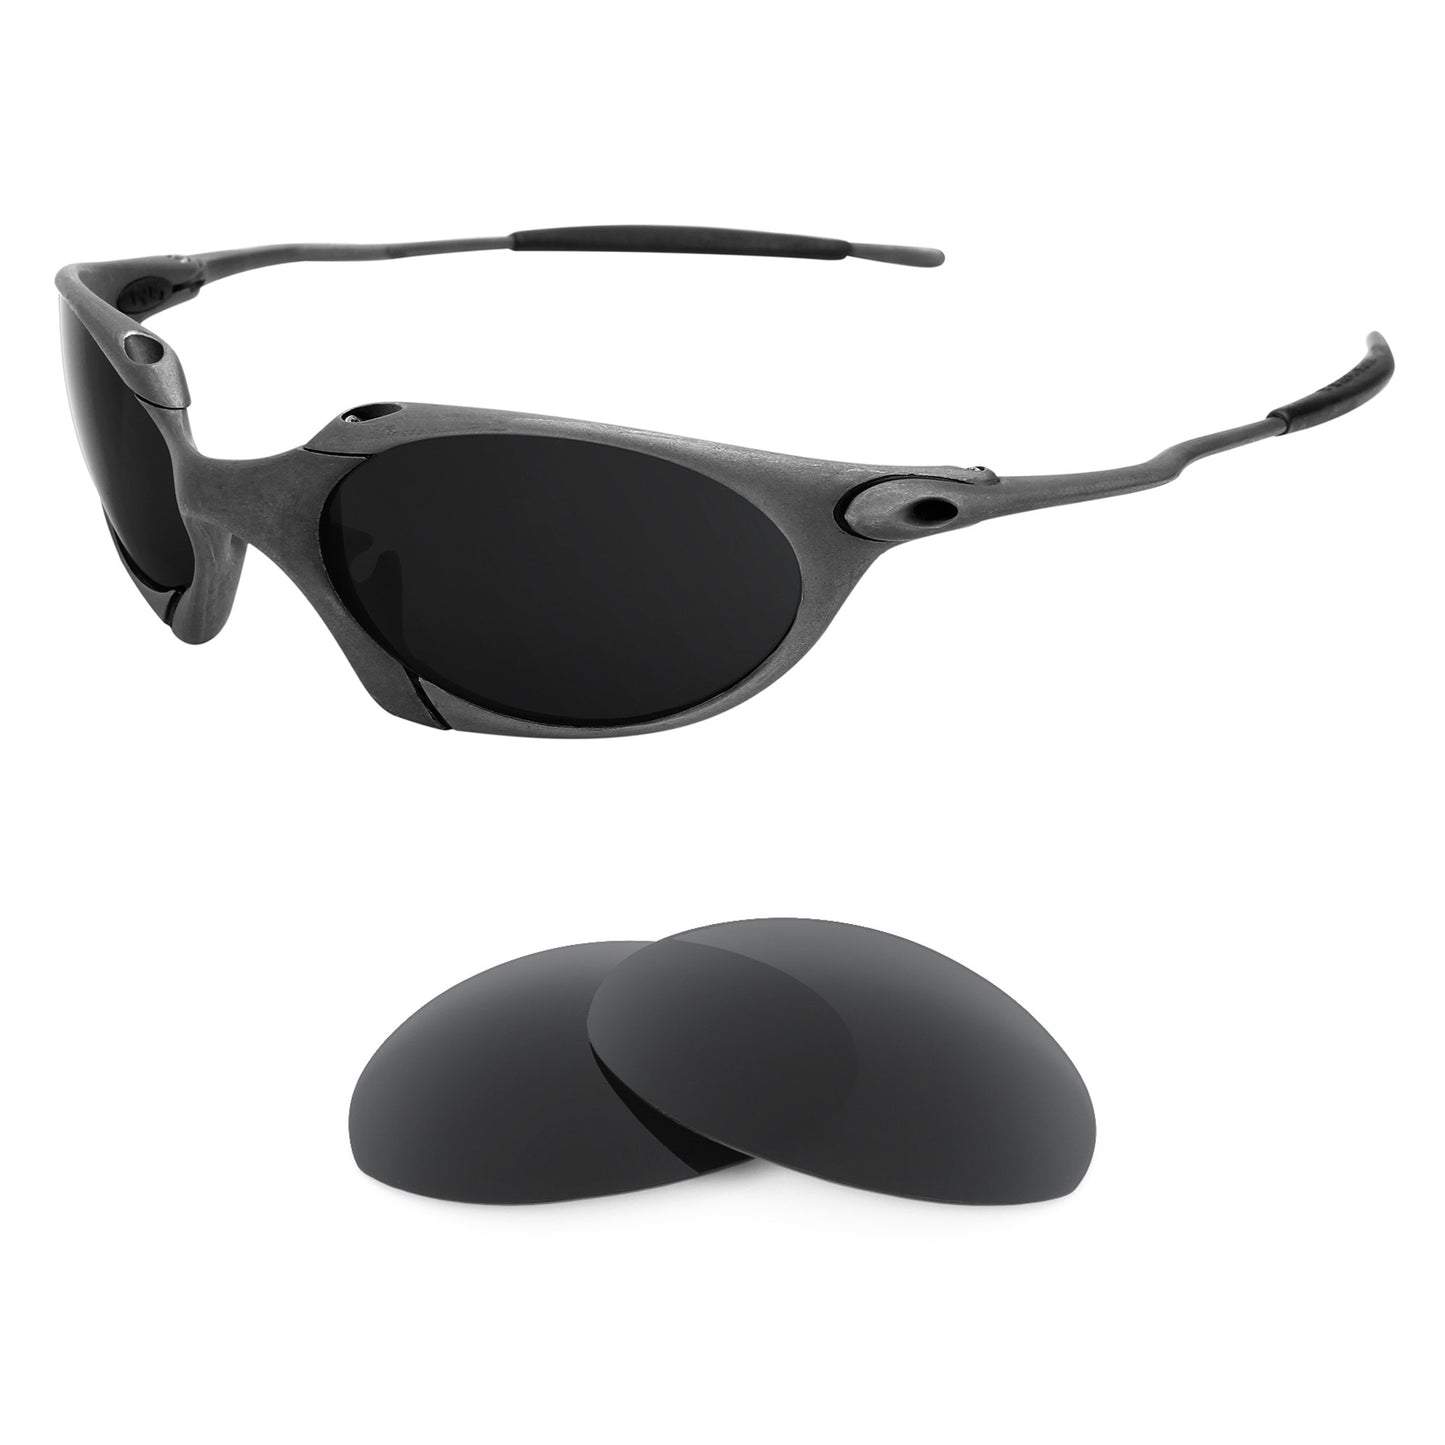 Oakley Romeo 1 sunglasses with replacement lenses